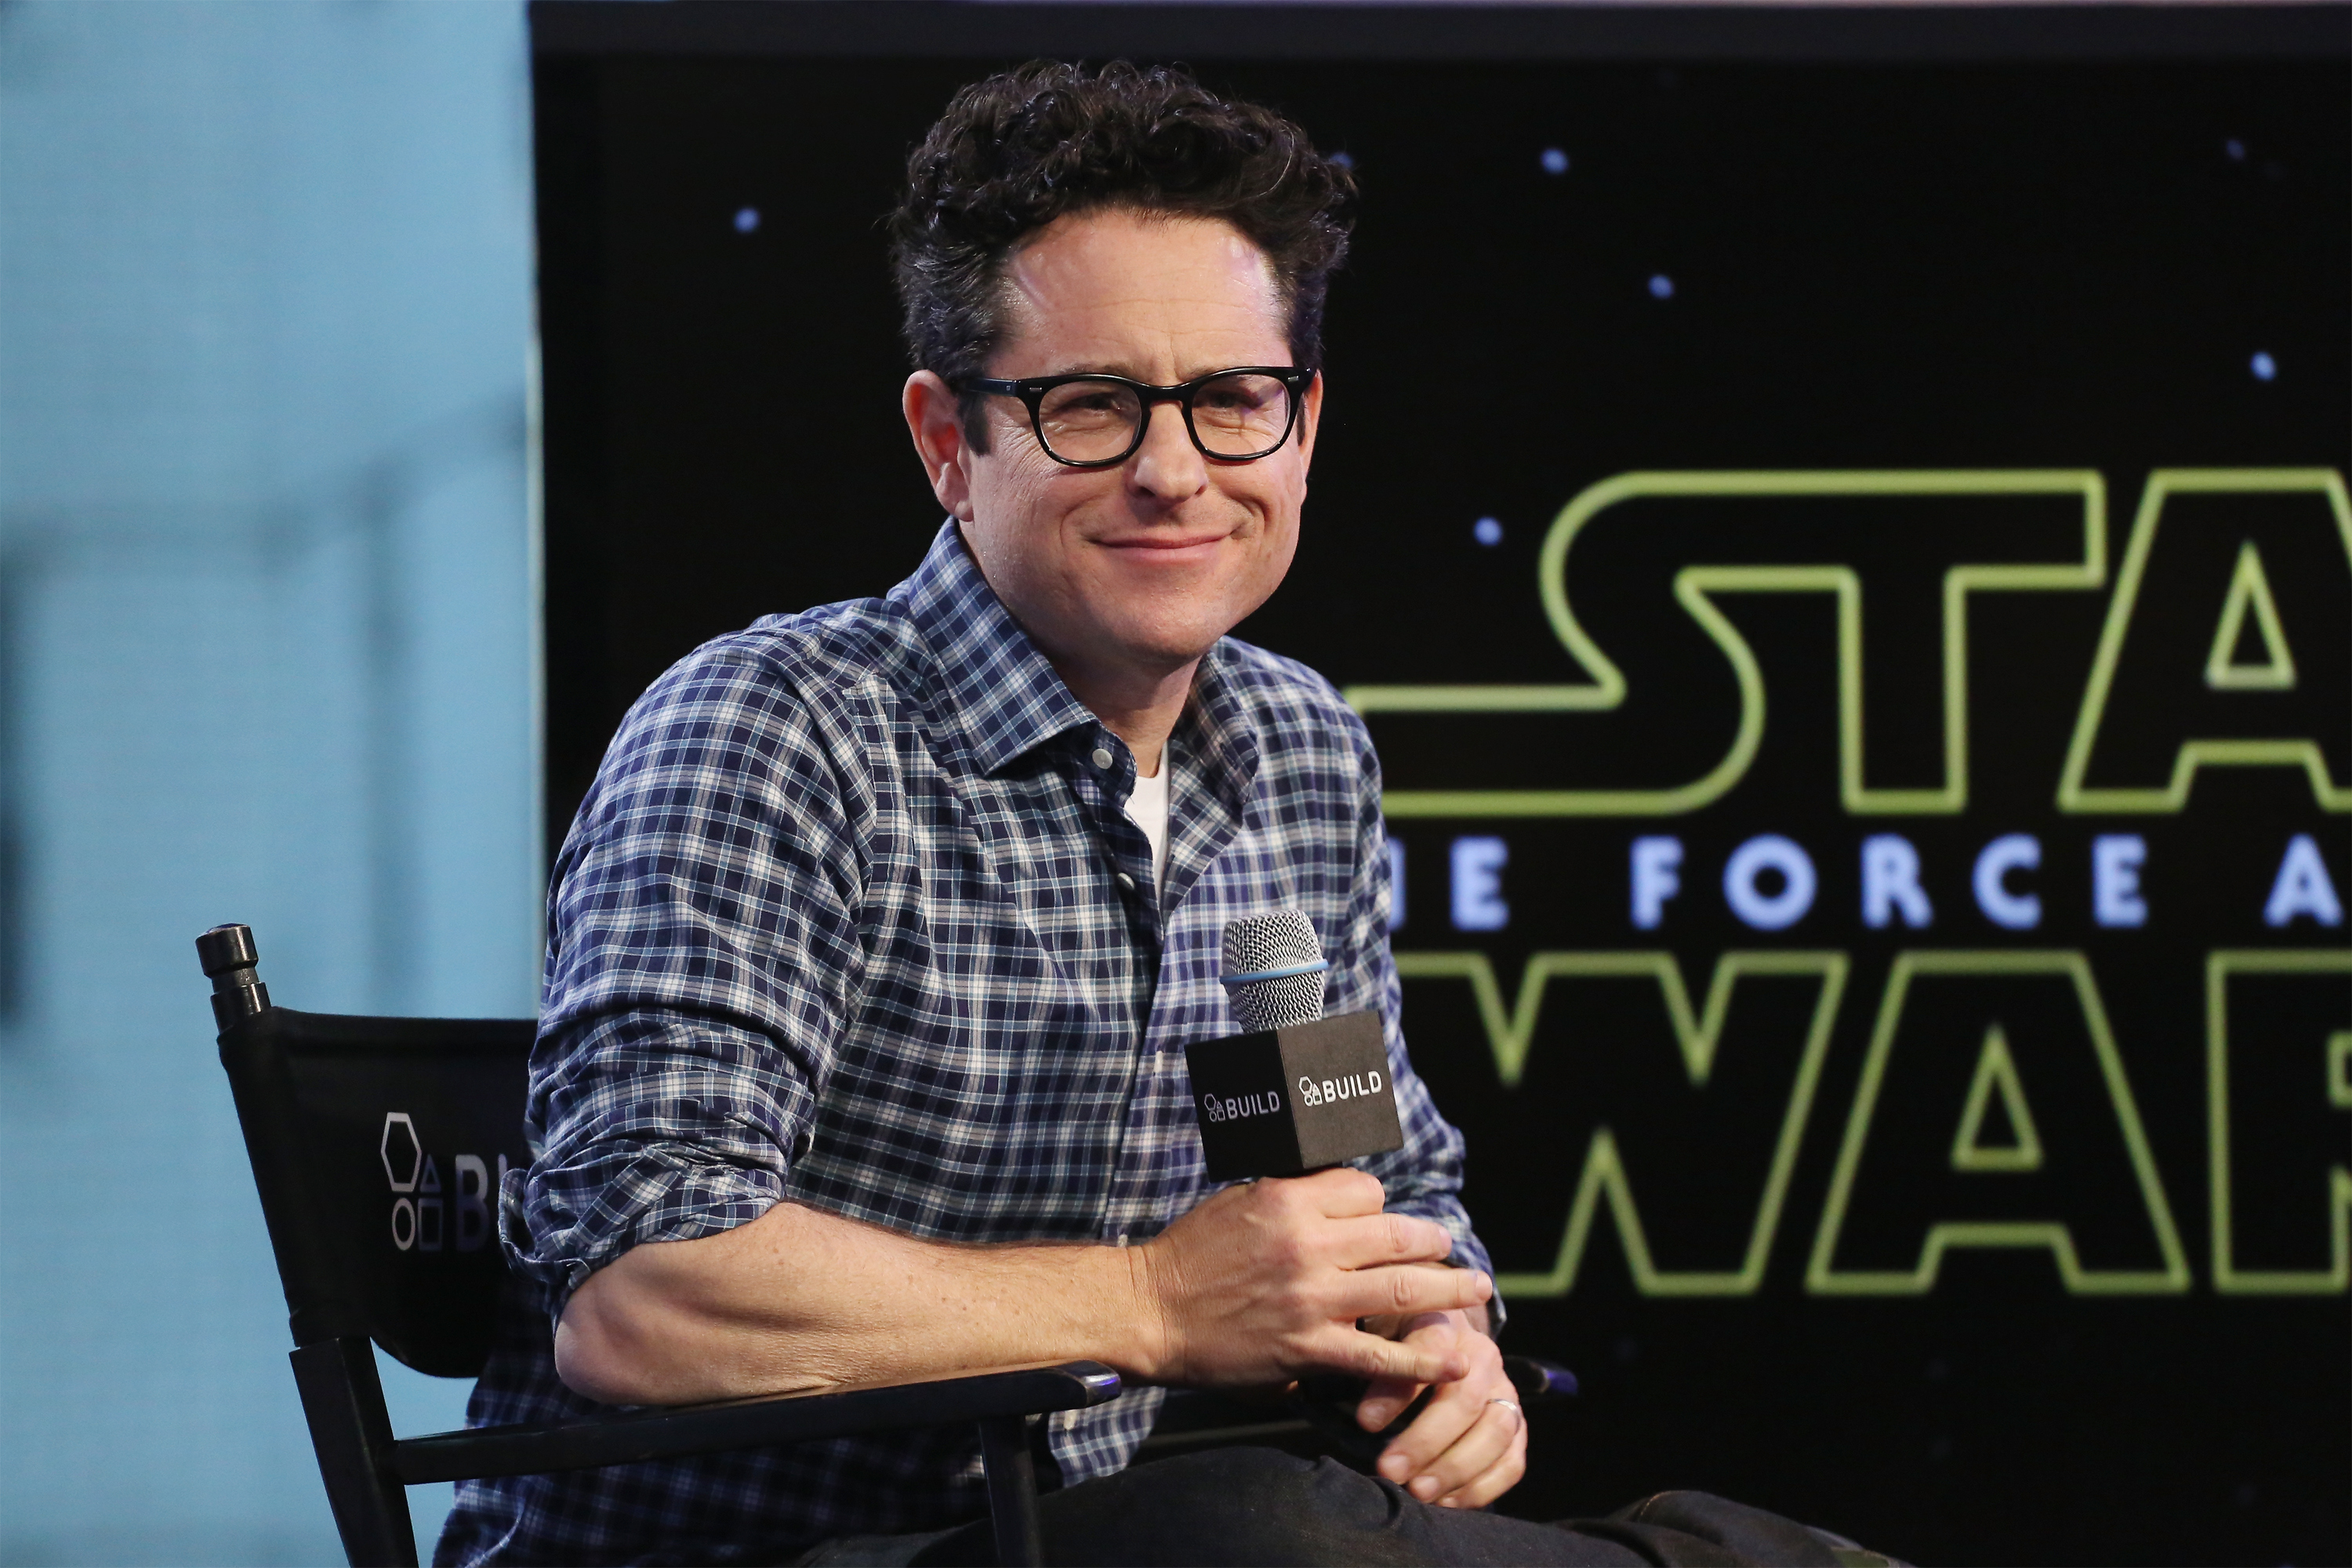 J.J. Abrams speaks at 'Star Wars: The Force Awakens' during the BUILD Series at AOL Studios In New York on Nove. 30, 2015 in New York City. (Mireya Acierto—FilmMagic/Getty Images)